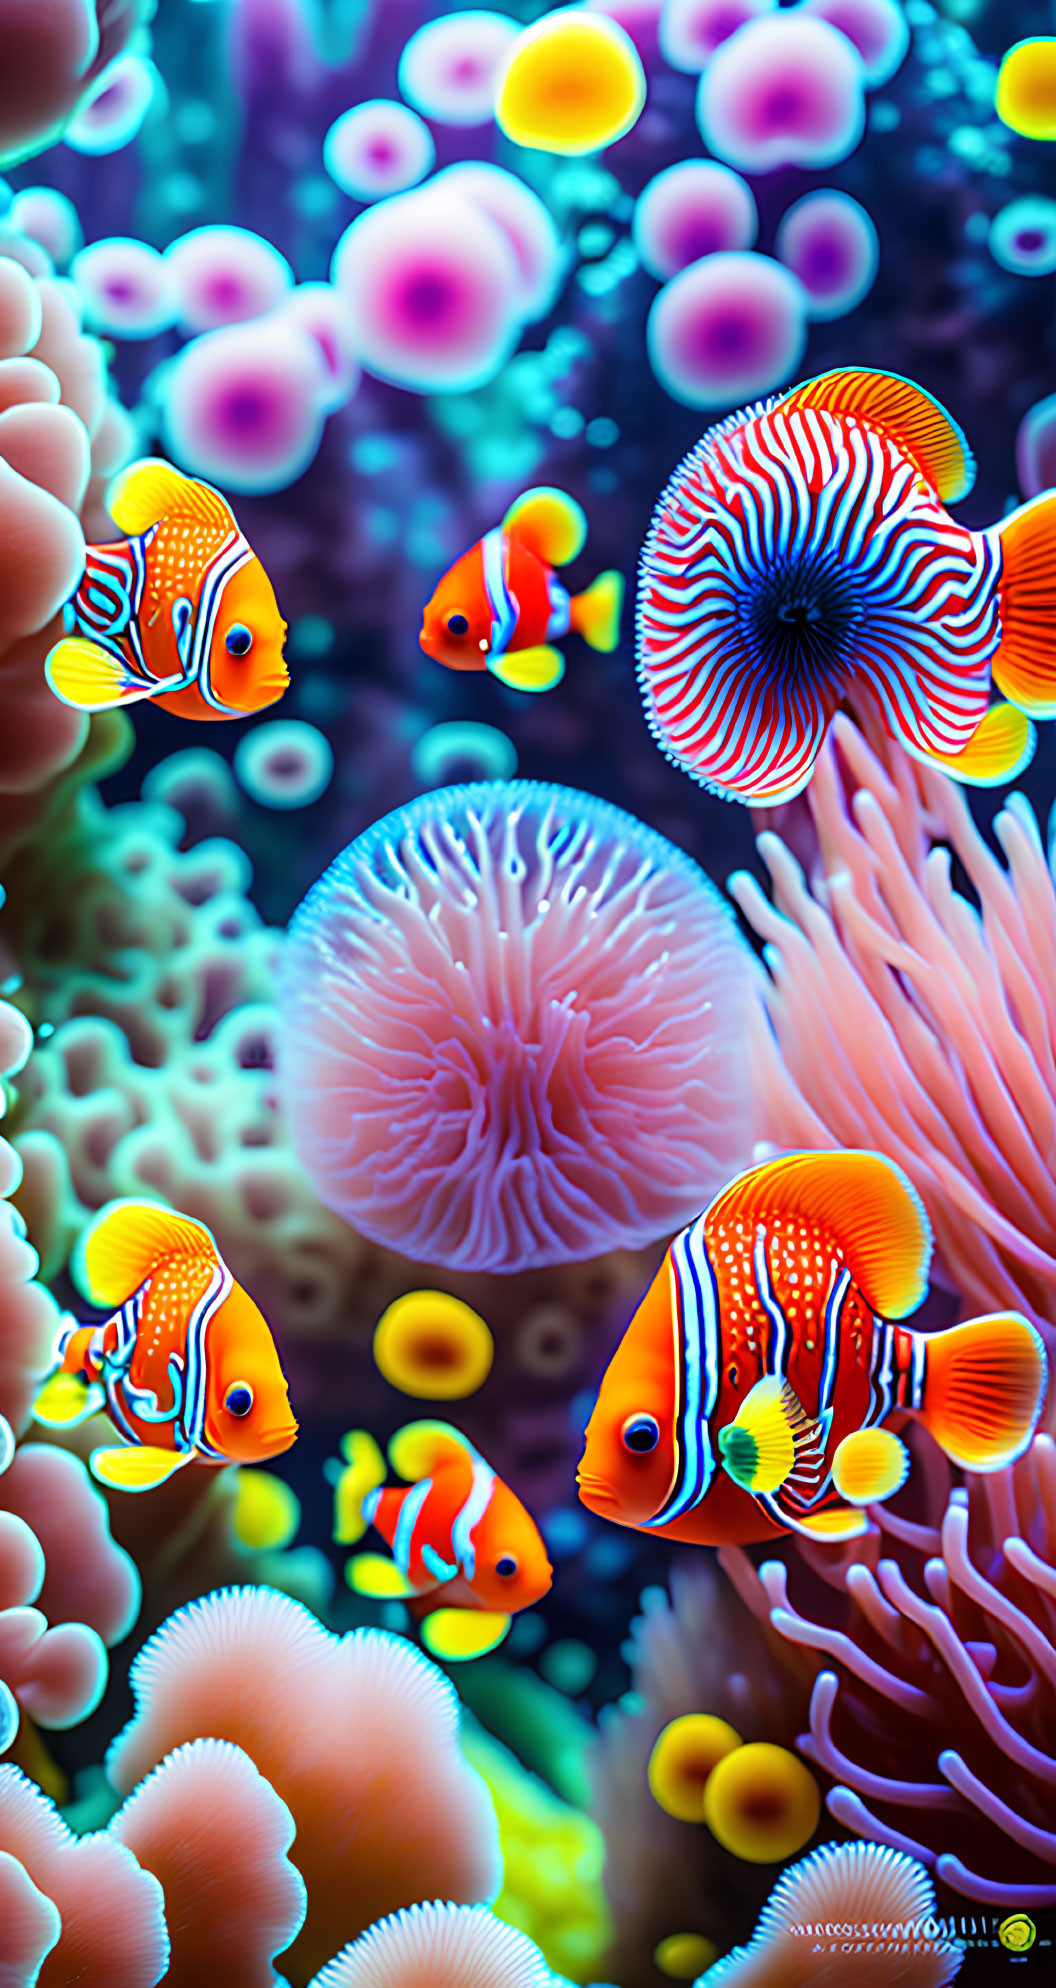 Vibrant Clownfish and Discus Fish in Colorful Underwater Scene